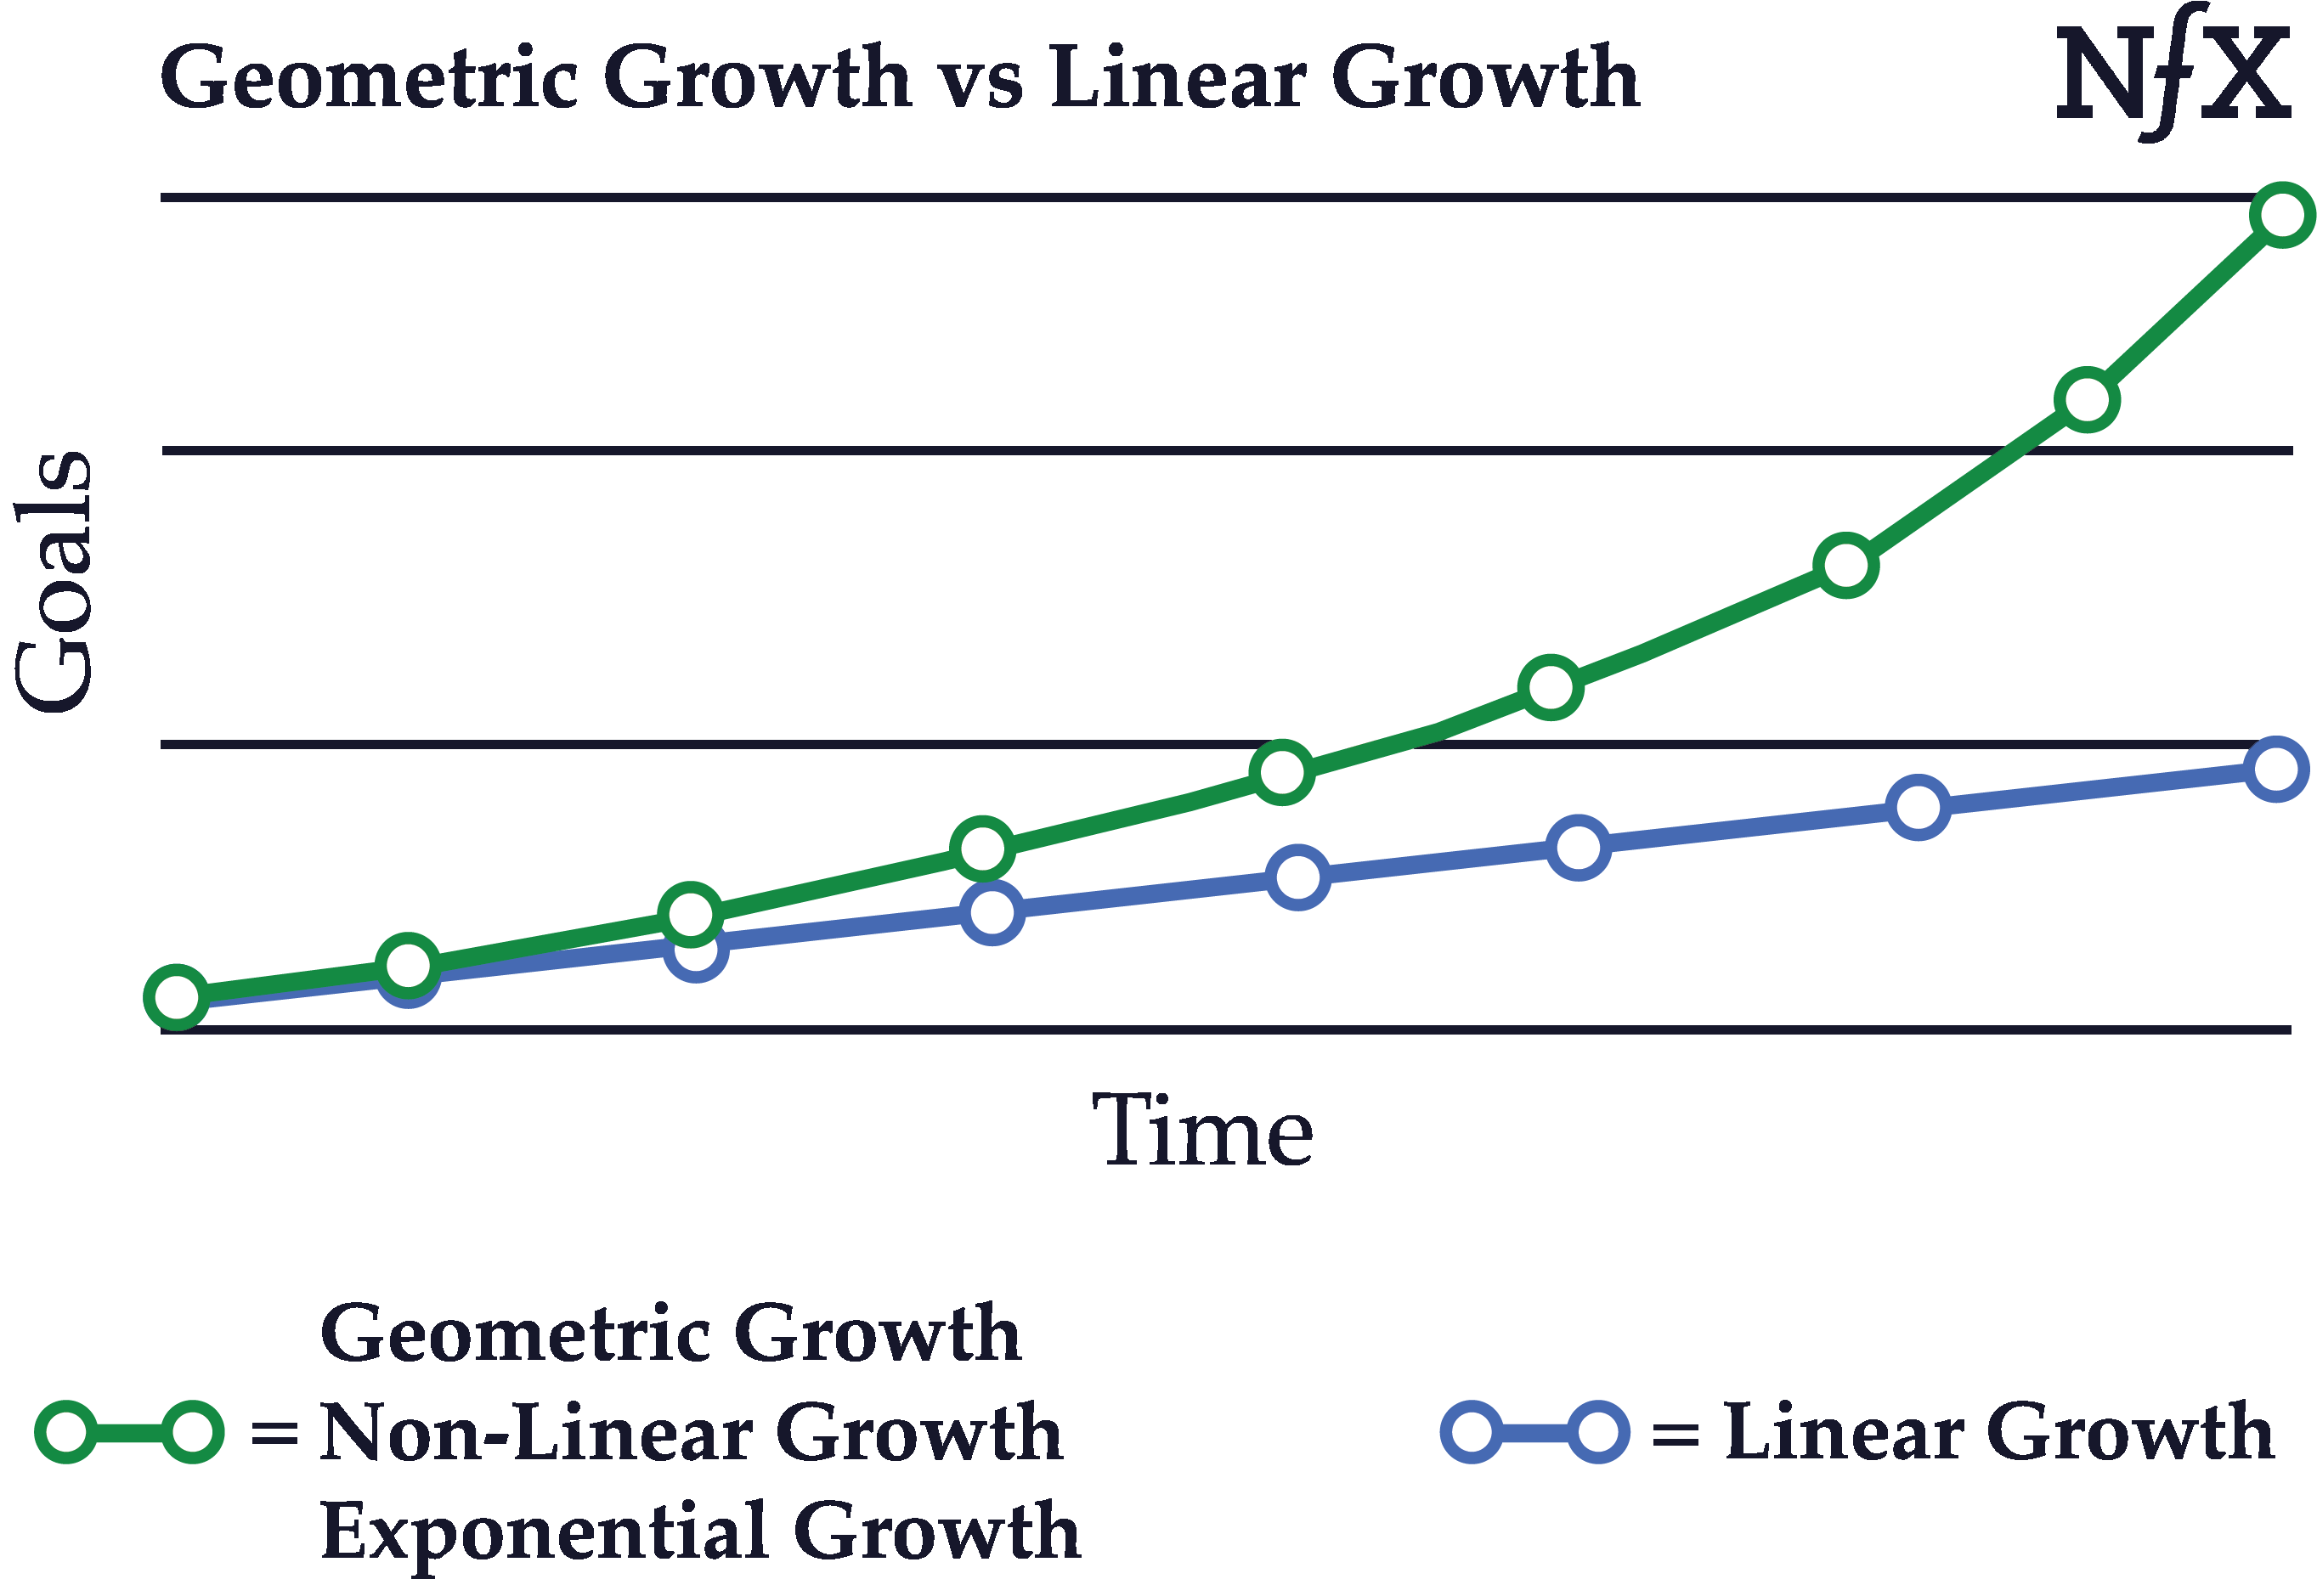 Geometric (Exponential/Non-Linear) Growth vs. Linear Growth